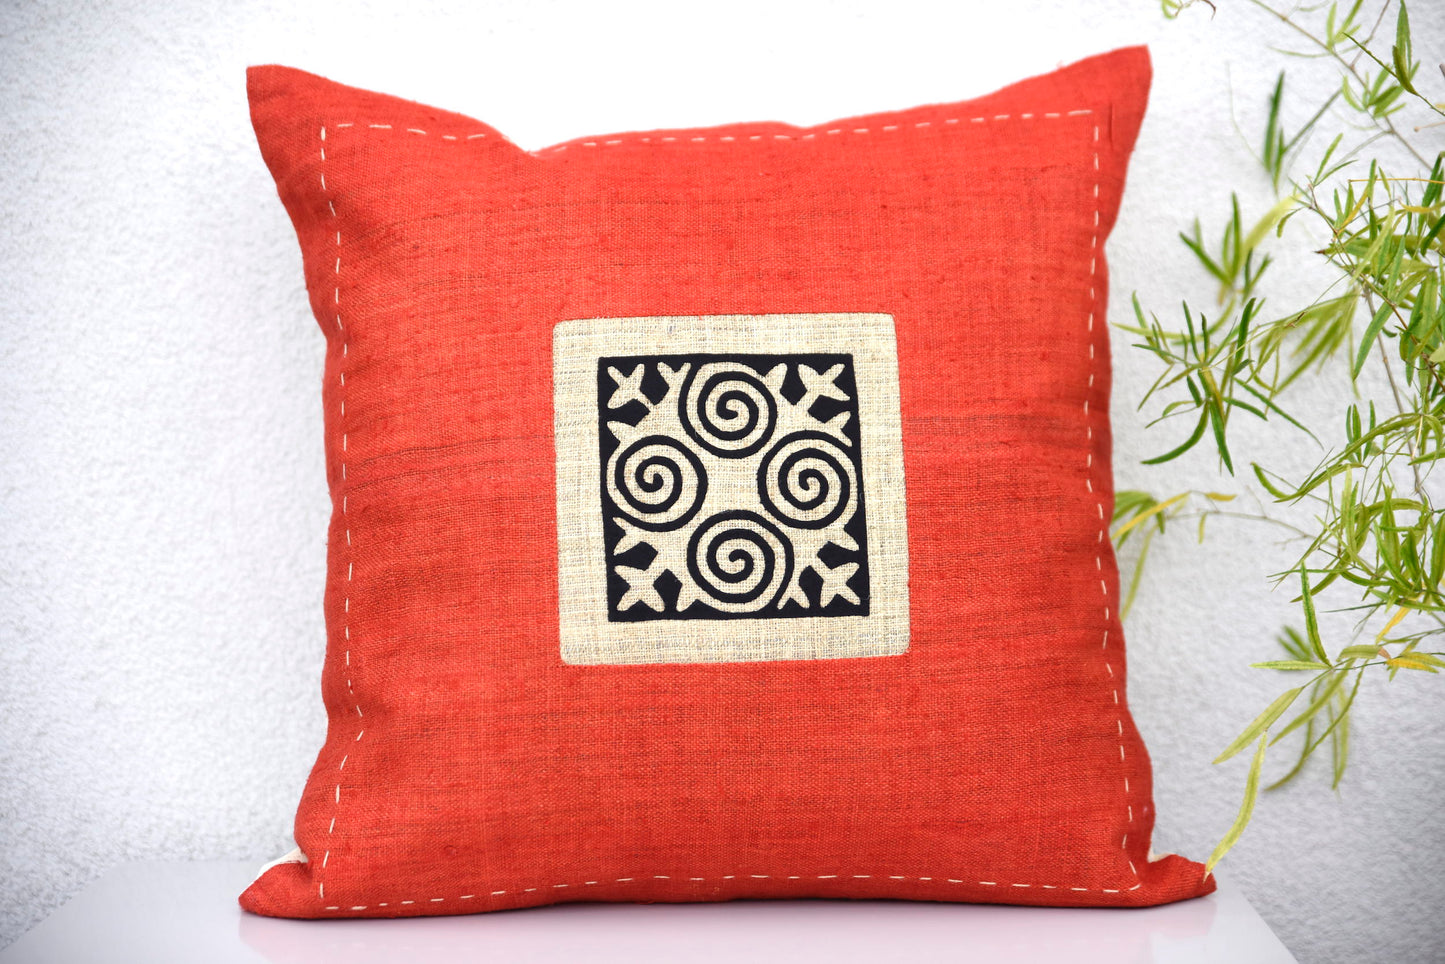 Red Hemp Cushion Cover with hand-stitches run along all sides